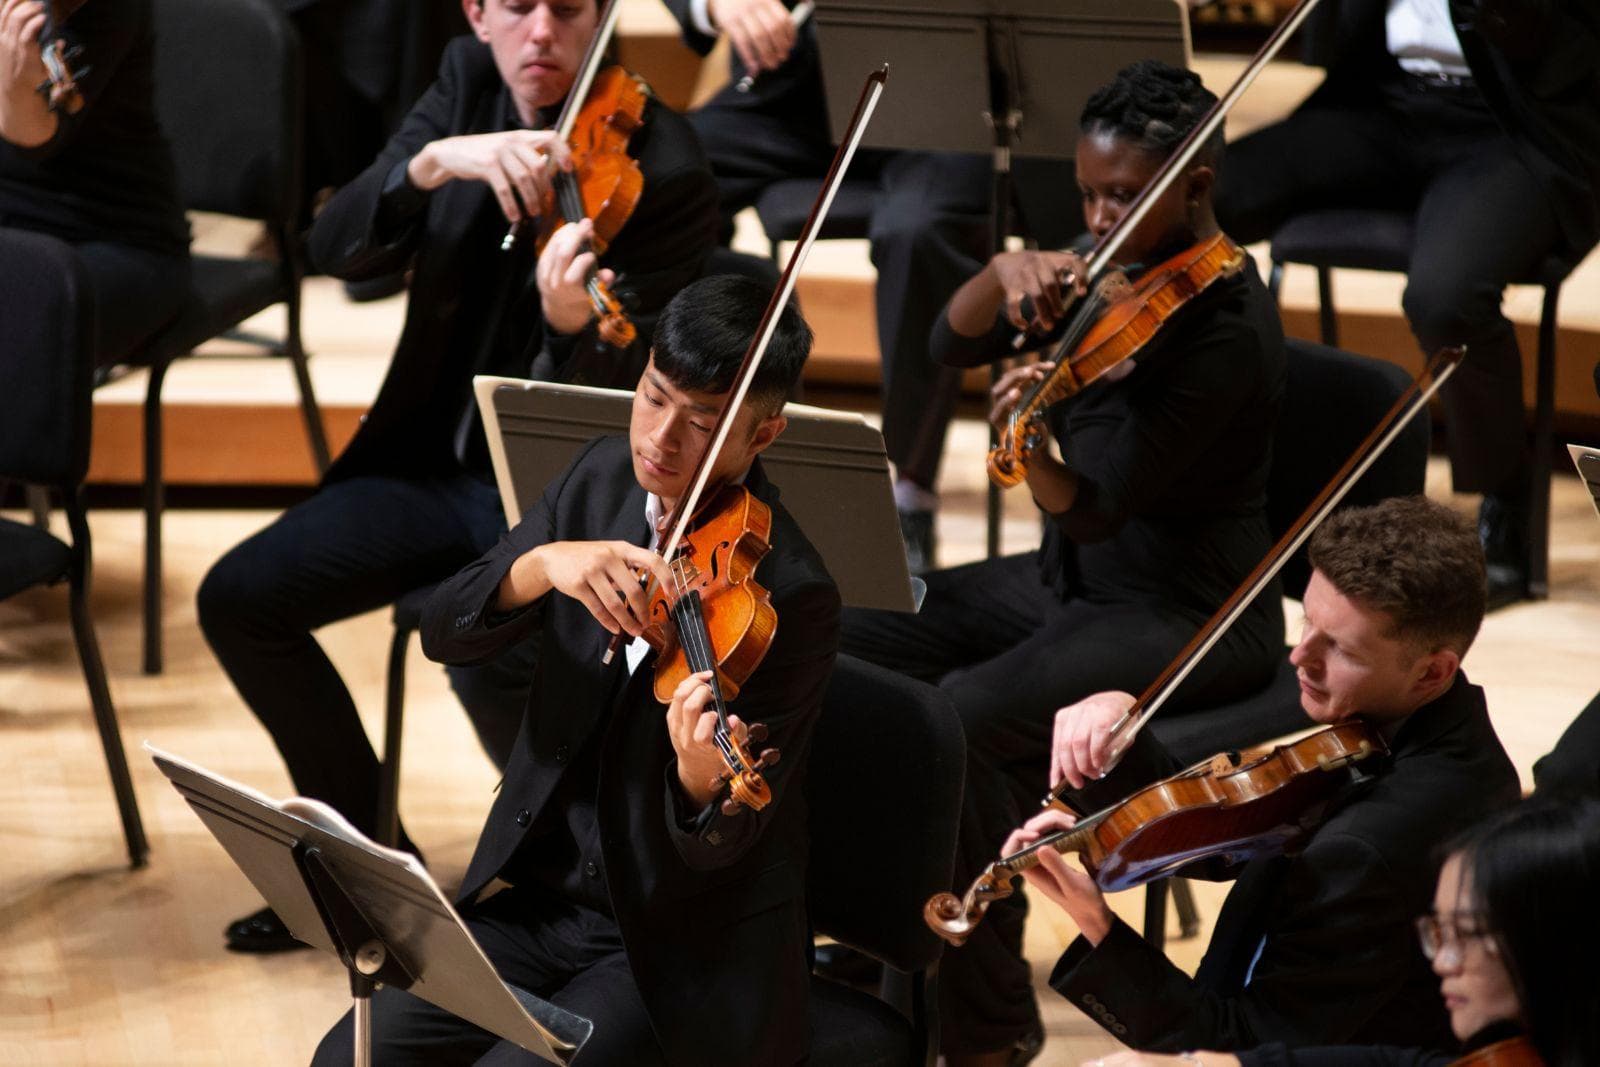 Students play violins in an orchestra on stage.